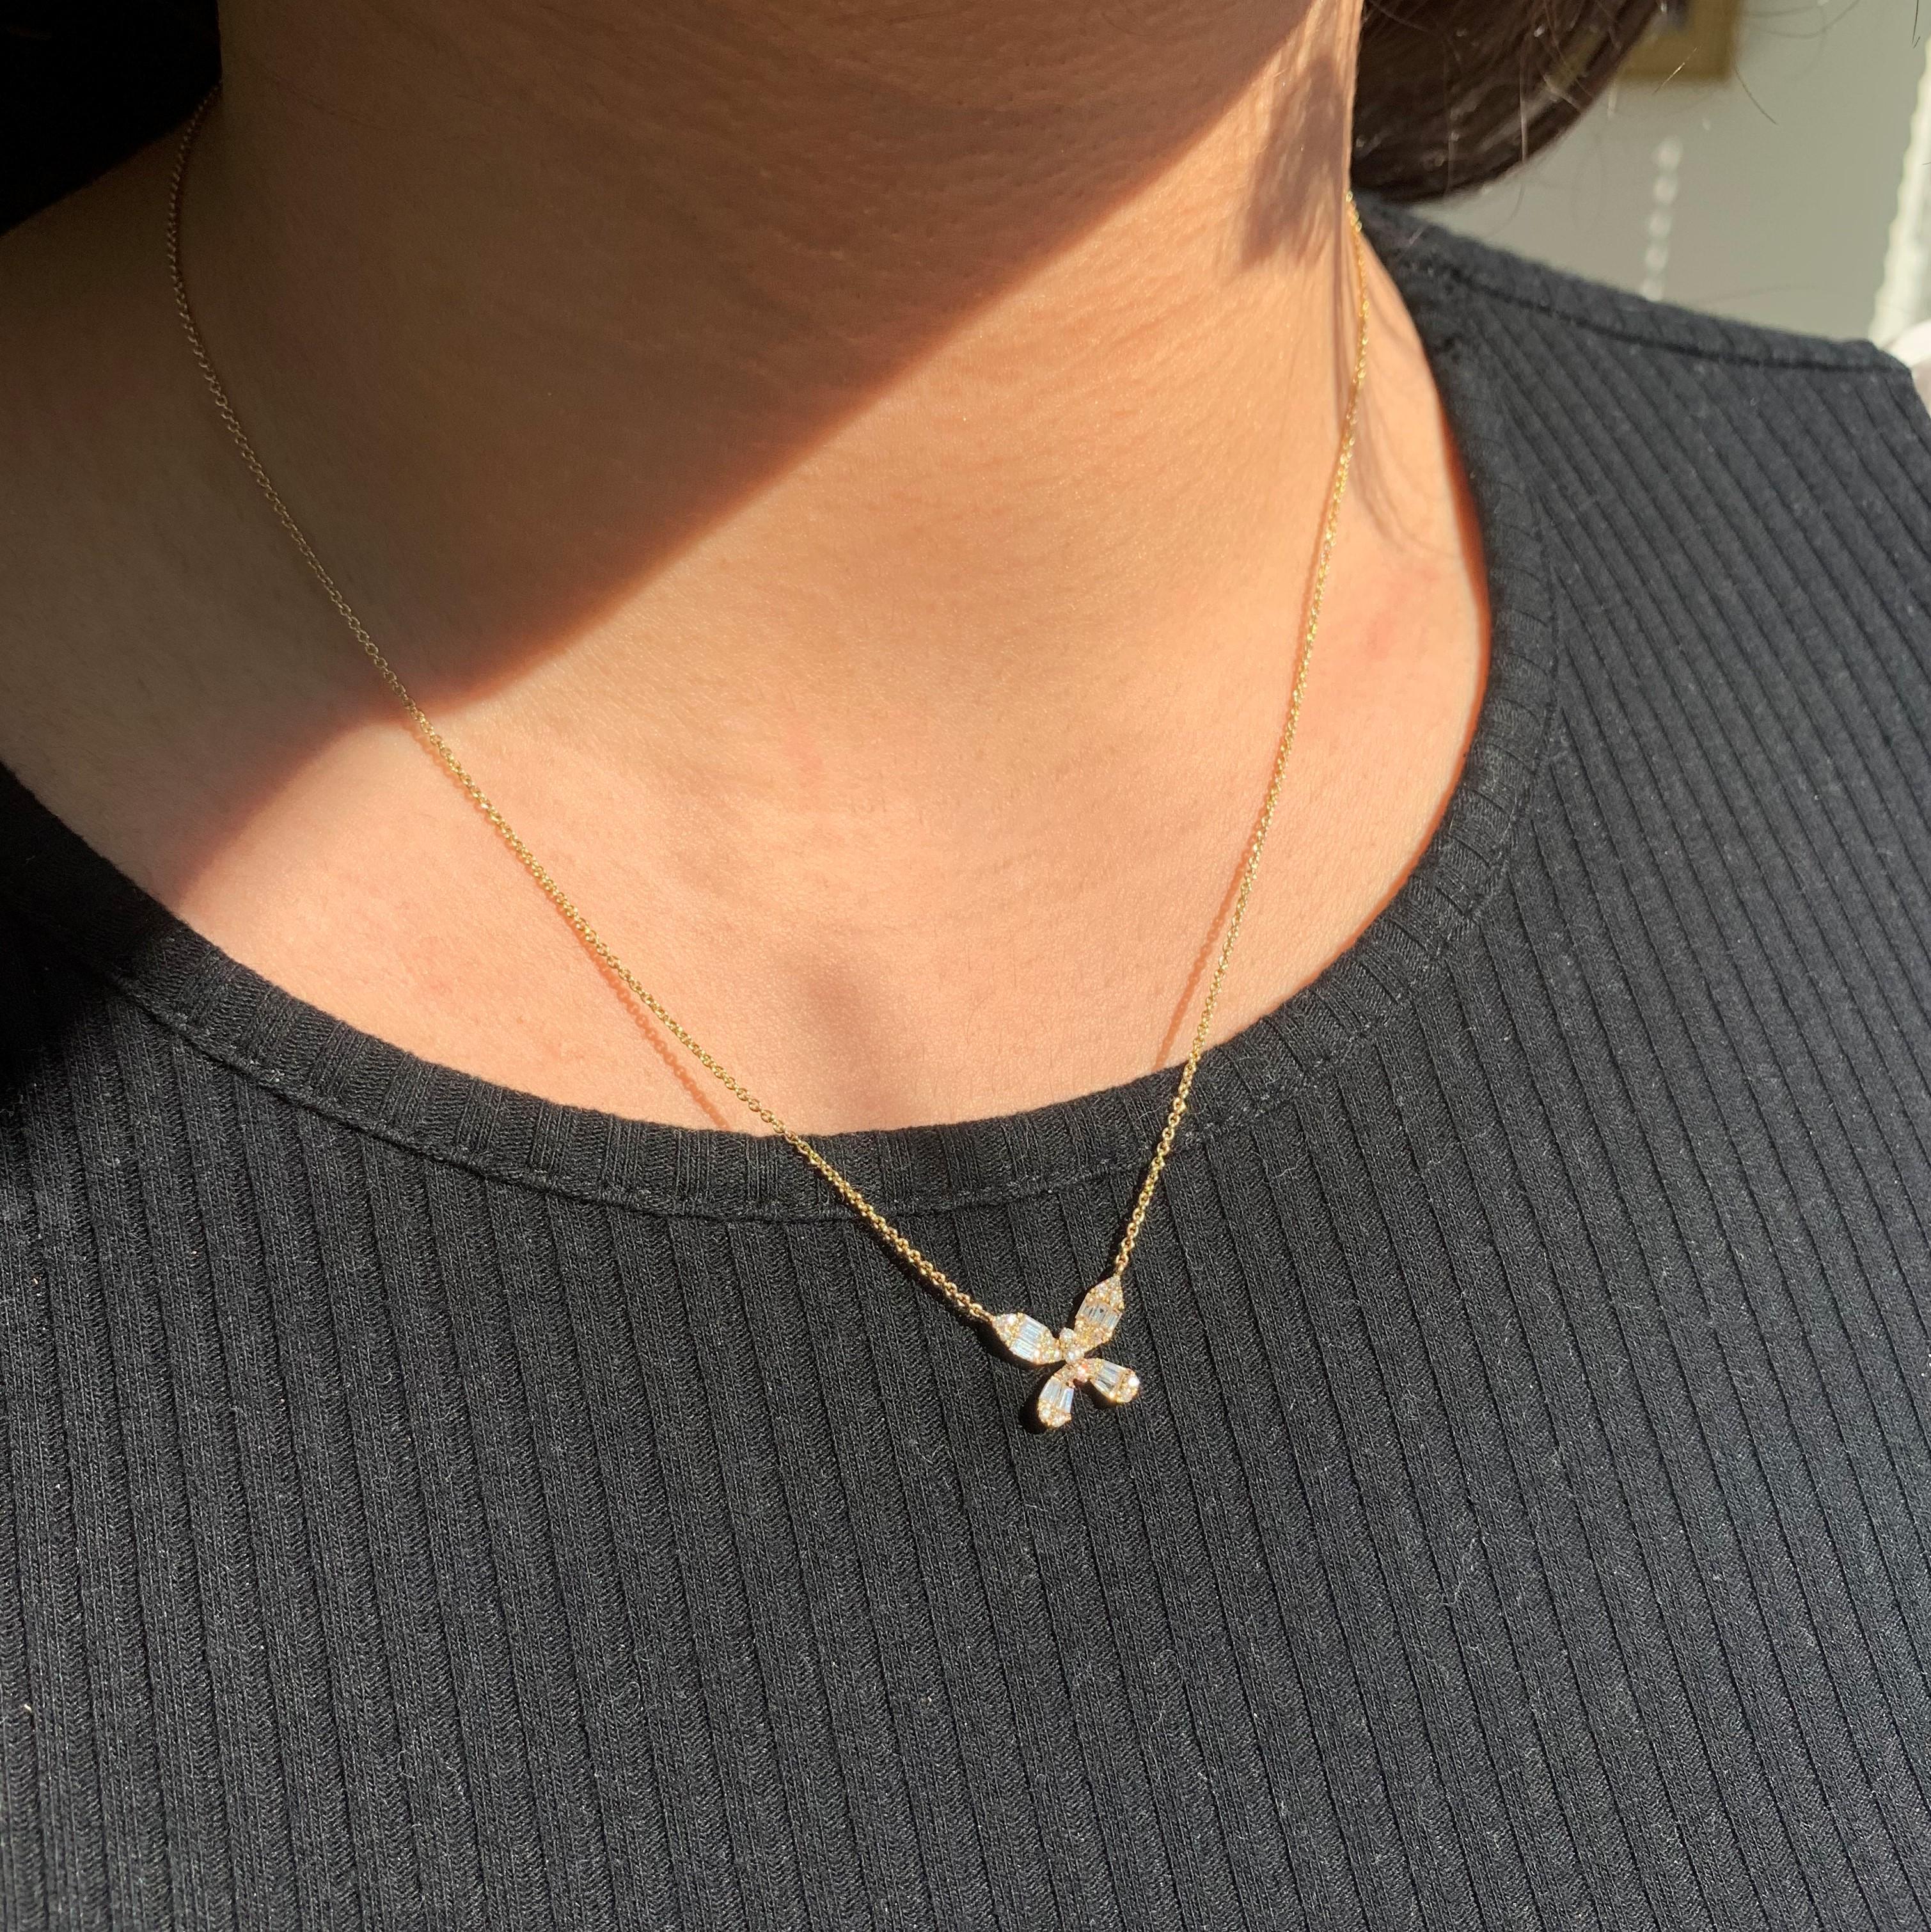 This is a Beautiful Baguette Butterfly Necklace! Crafted of 14K Gold featuring stunning baguette diamonds surrounded with sparkling round Diamonds! Chain is Adjustable 16-18